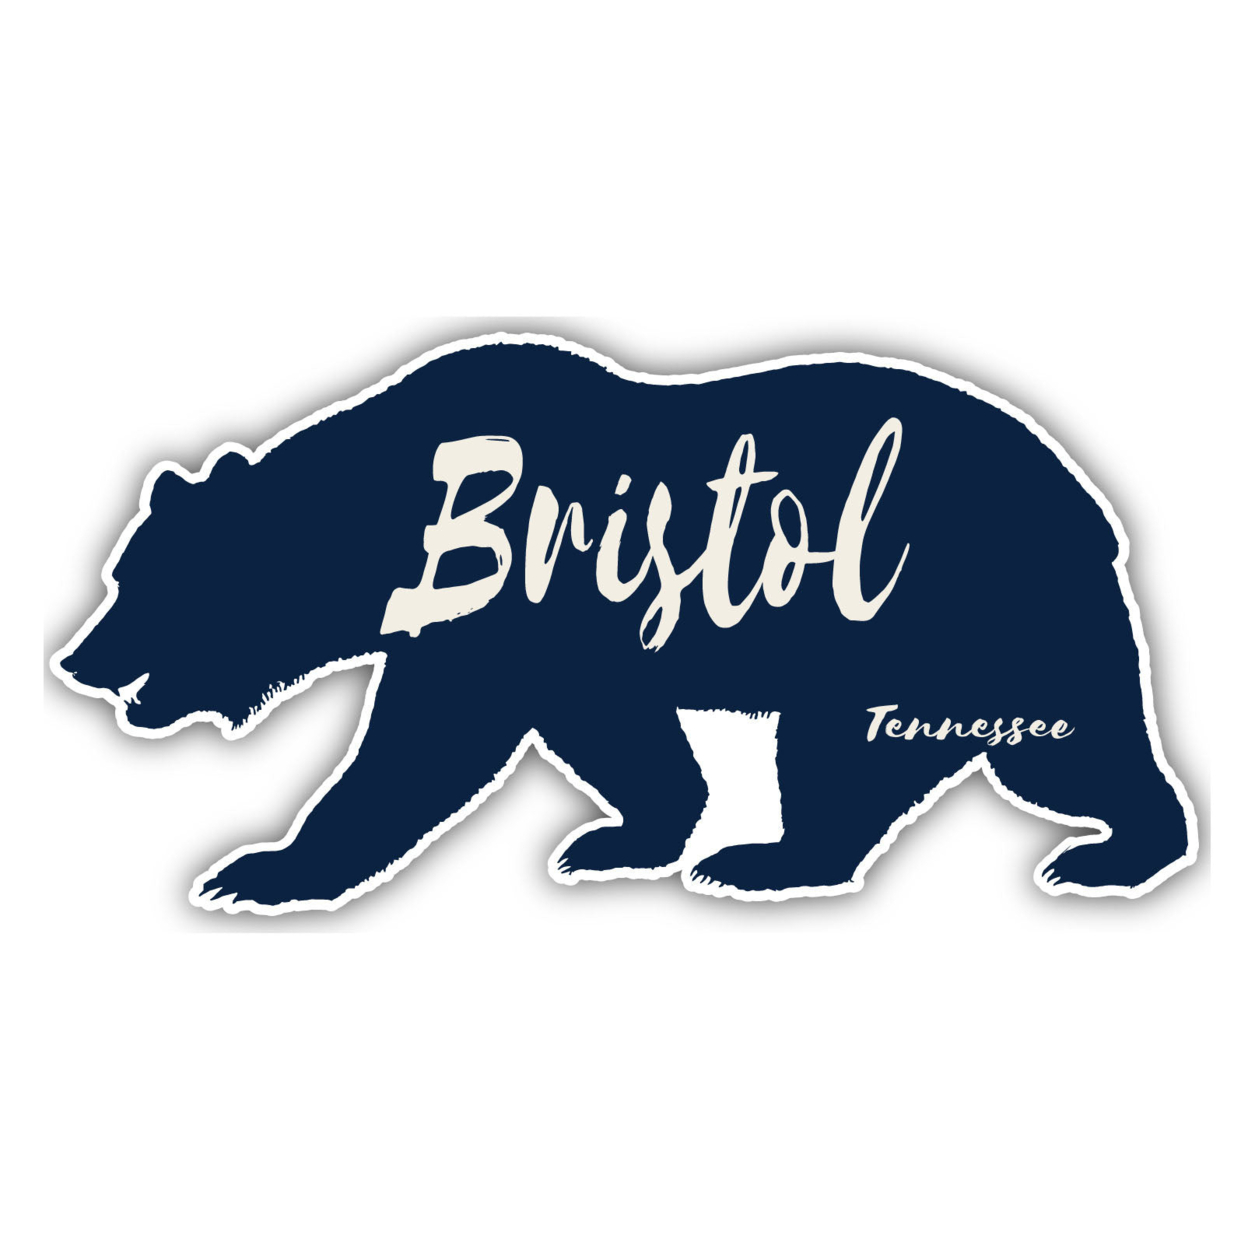 Bristol Tennessee Souvenir Decorative Stickers (Choose Theme And Size) - 4-Pack, 8-Inch, Tent